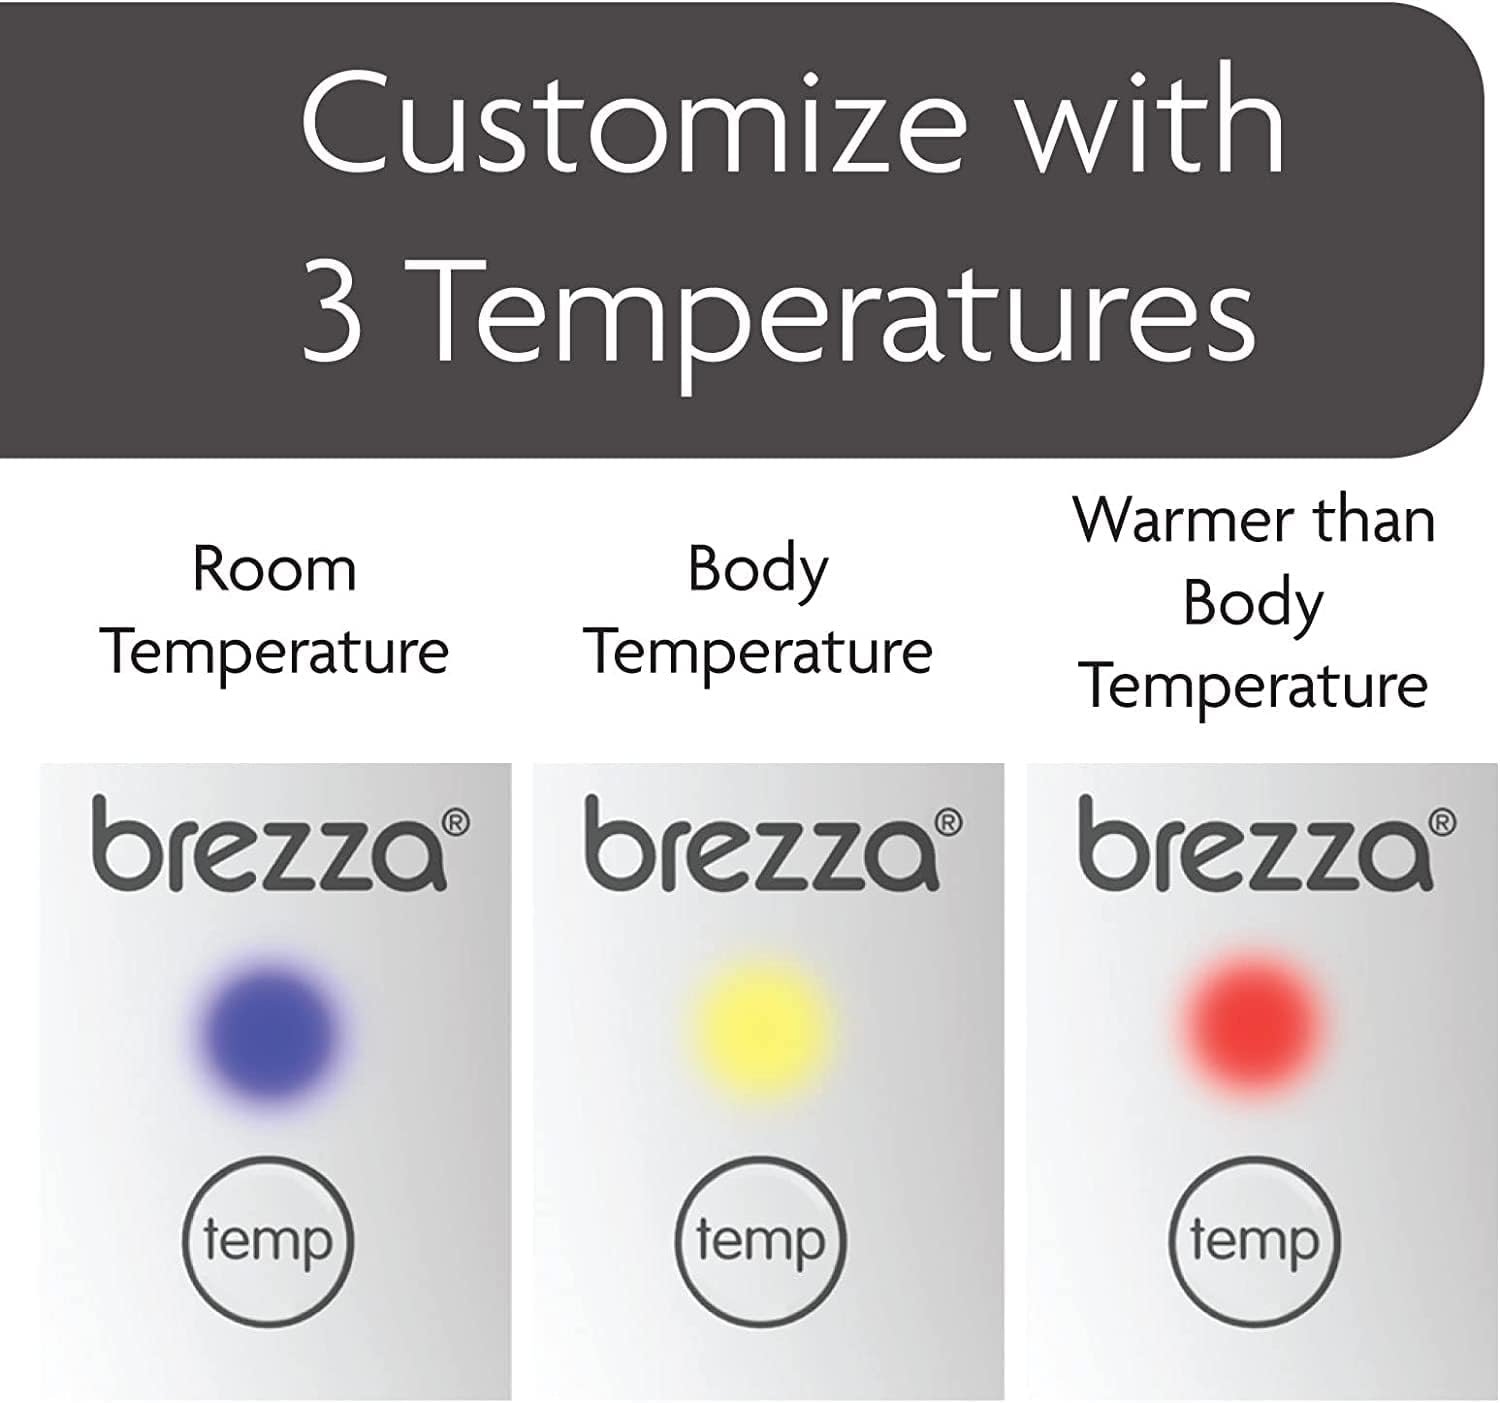 Baby Brezza Instant Warmer – Instantly Dispense Warm Water at Perfect Baby Bottle Temperature - Traditional Baby Bottle Warmer Replacement - Fast Baby Formula Bottles 24/7 – 3 Temperatures